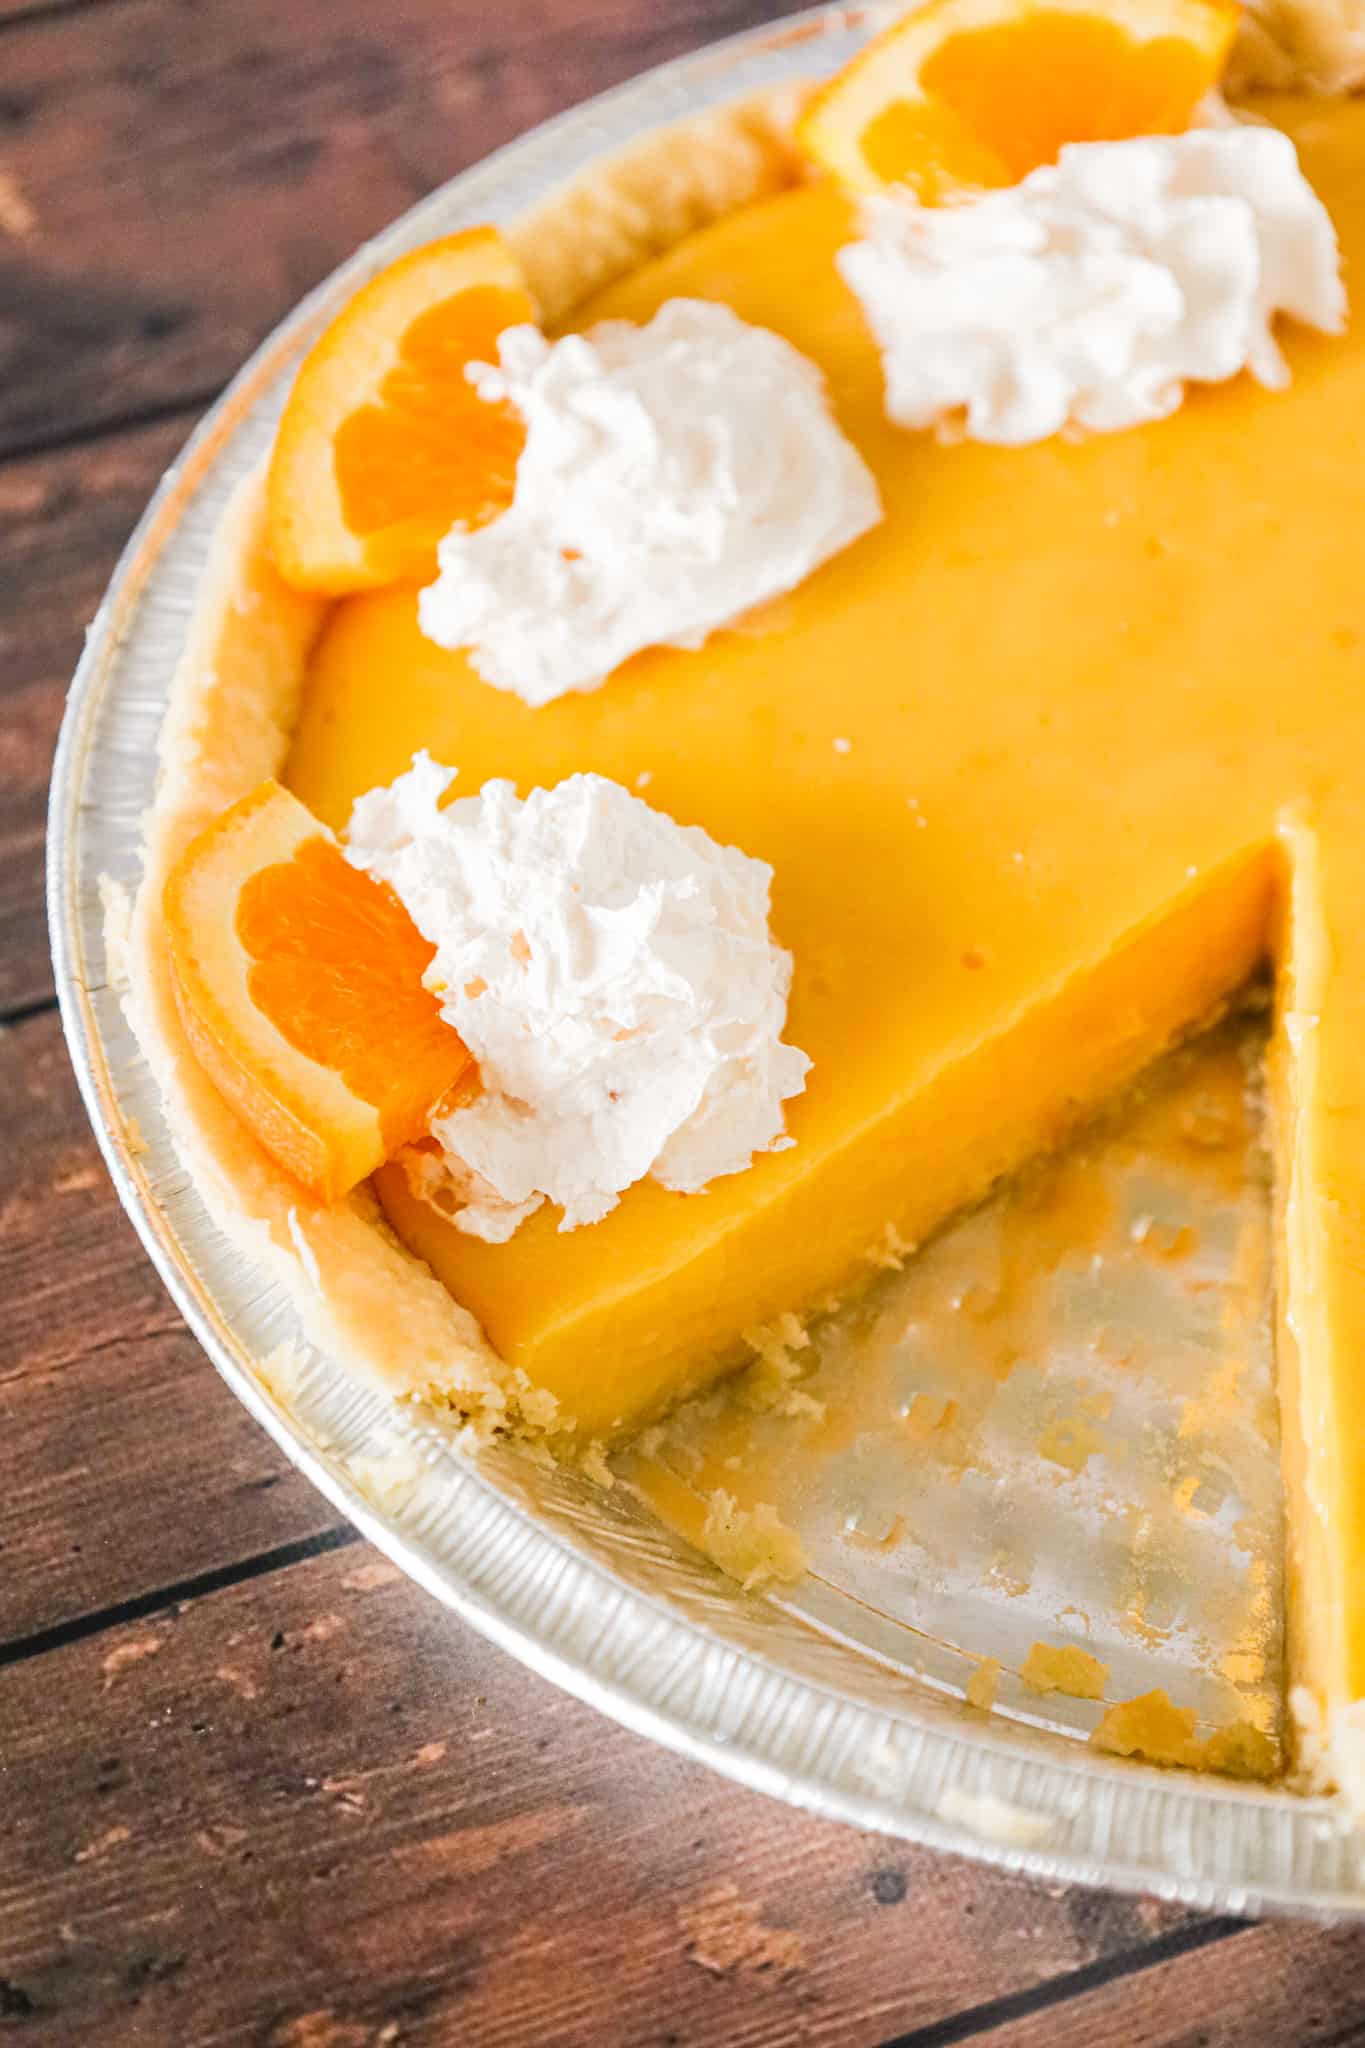 Orange Pie is a sweet and tart pie made with a store bought pie crust and a creamy homemade orange filling.